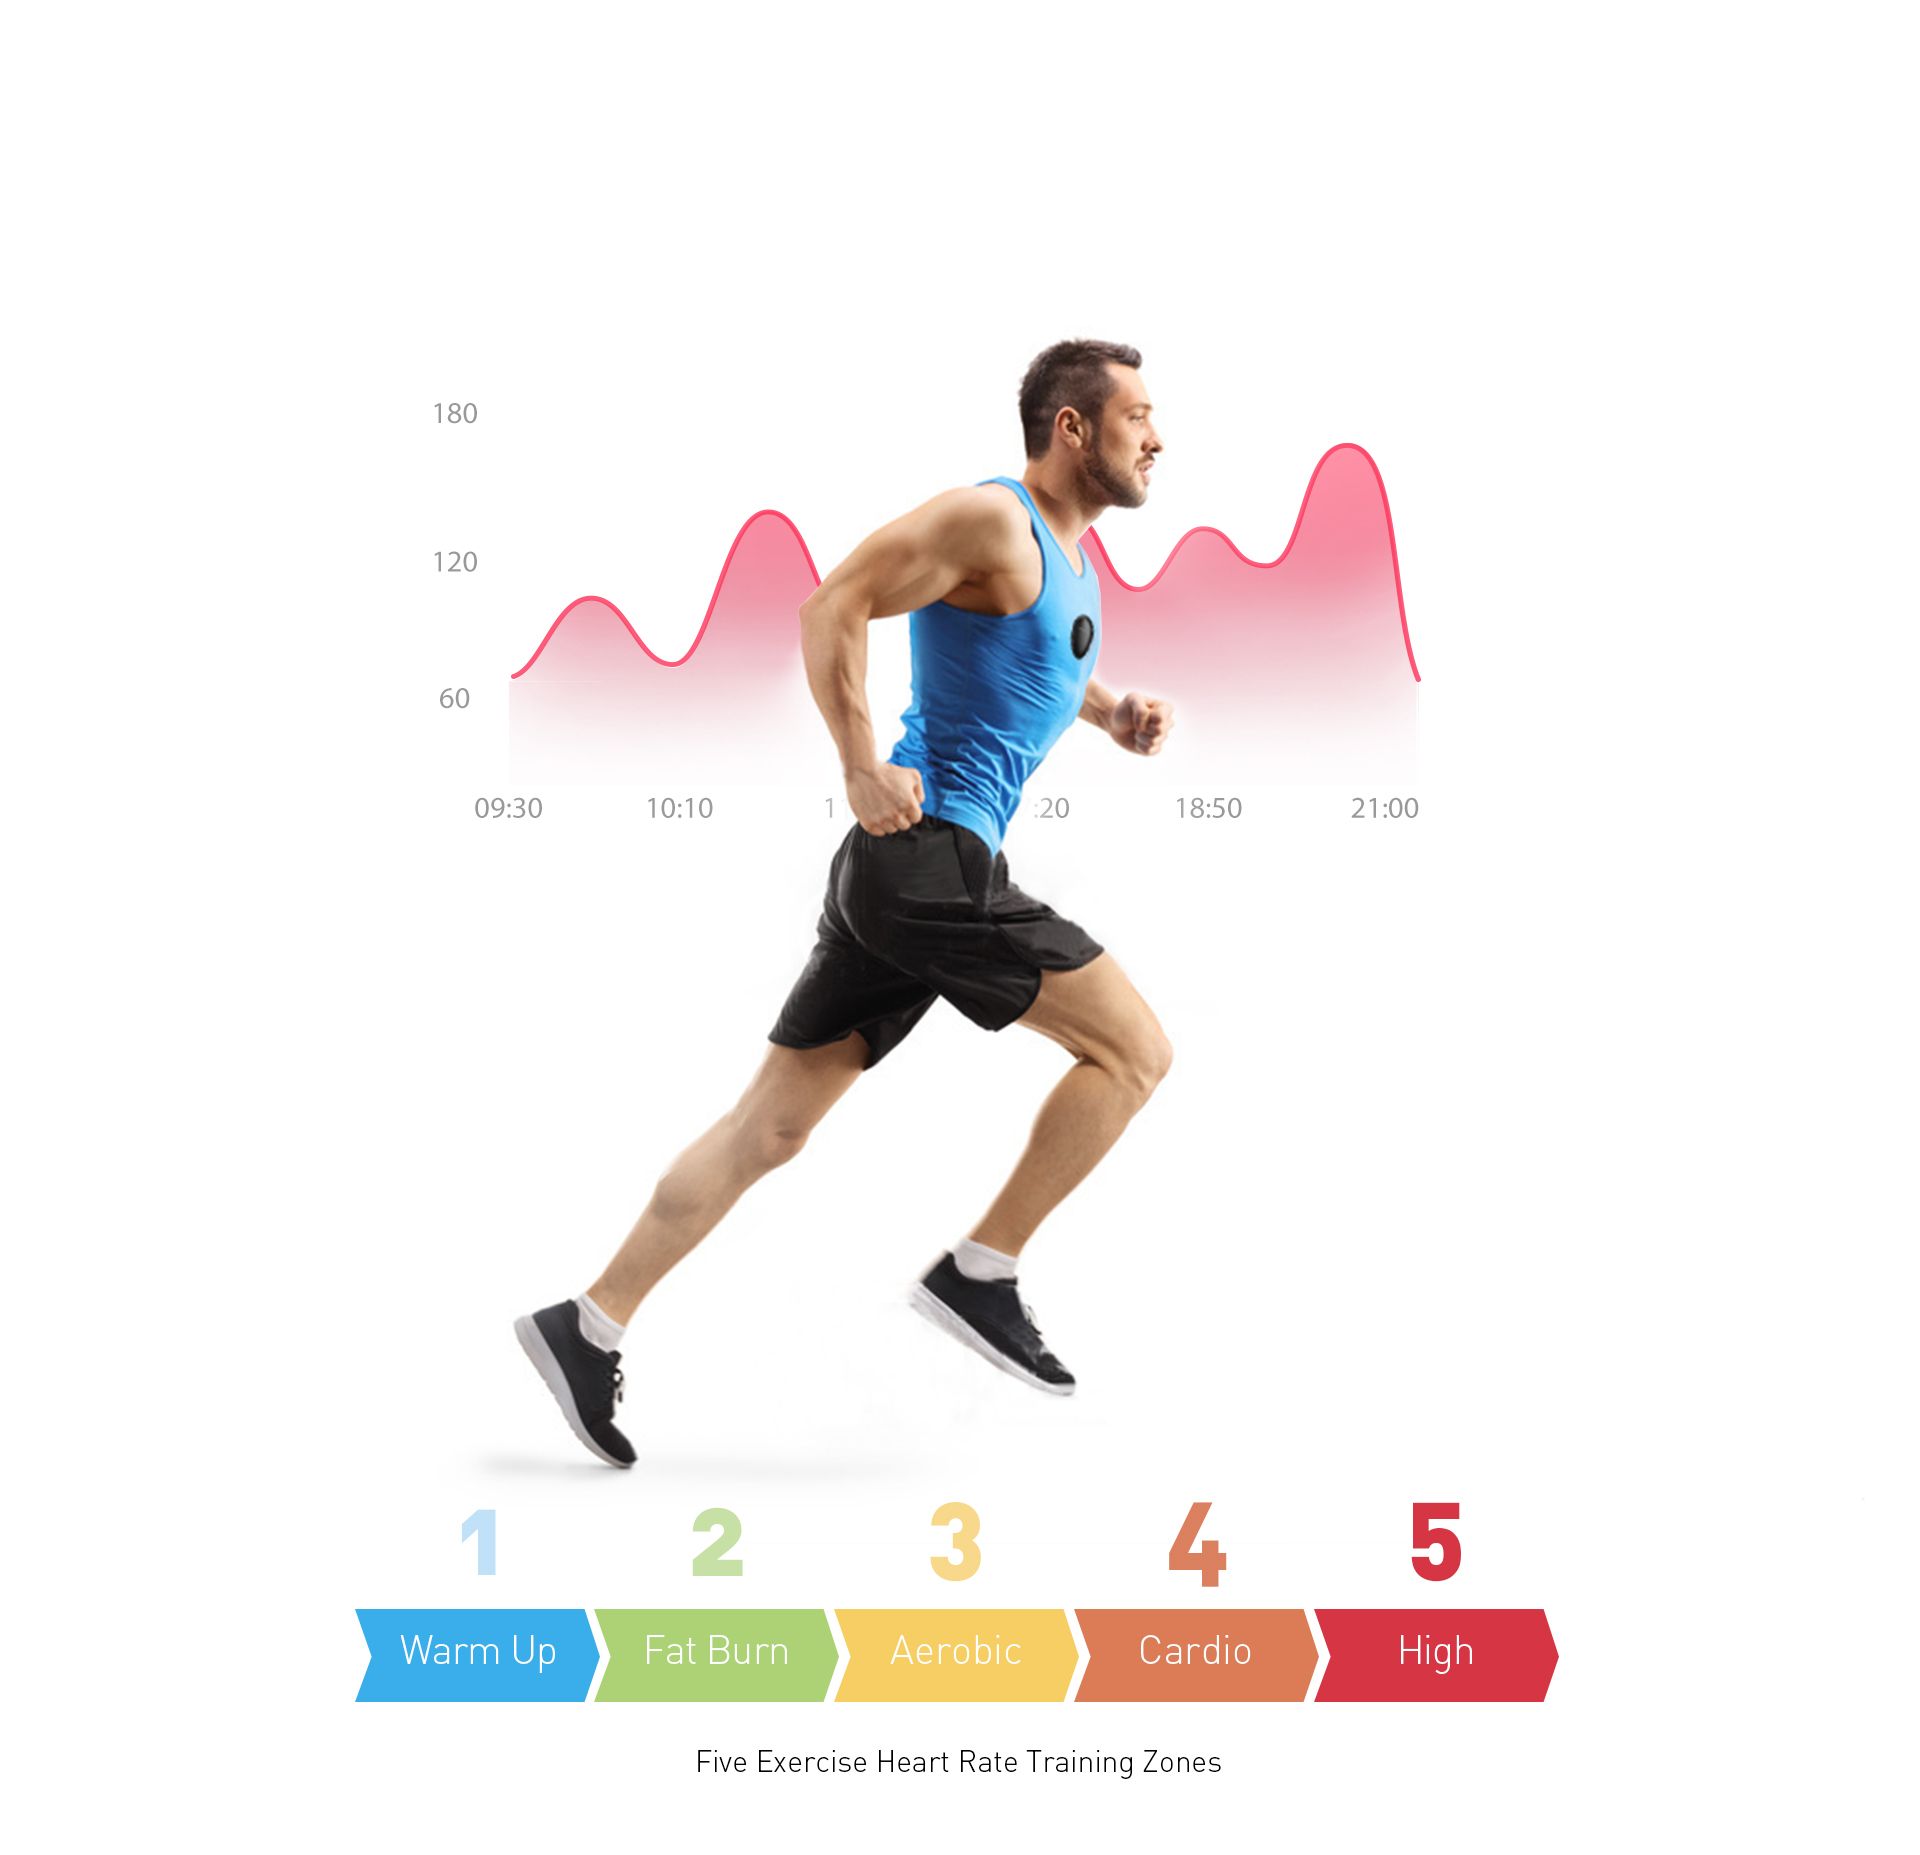 Exercise heart rate monitoring